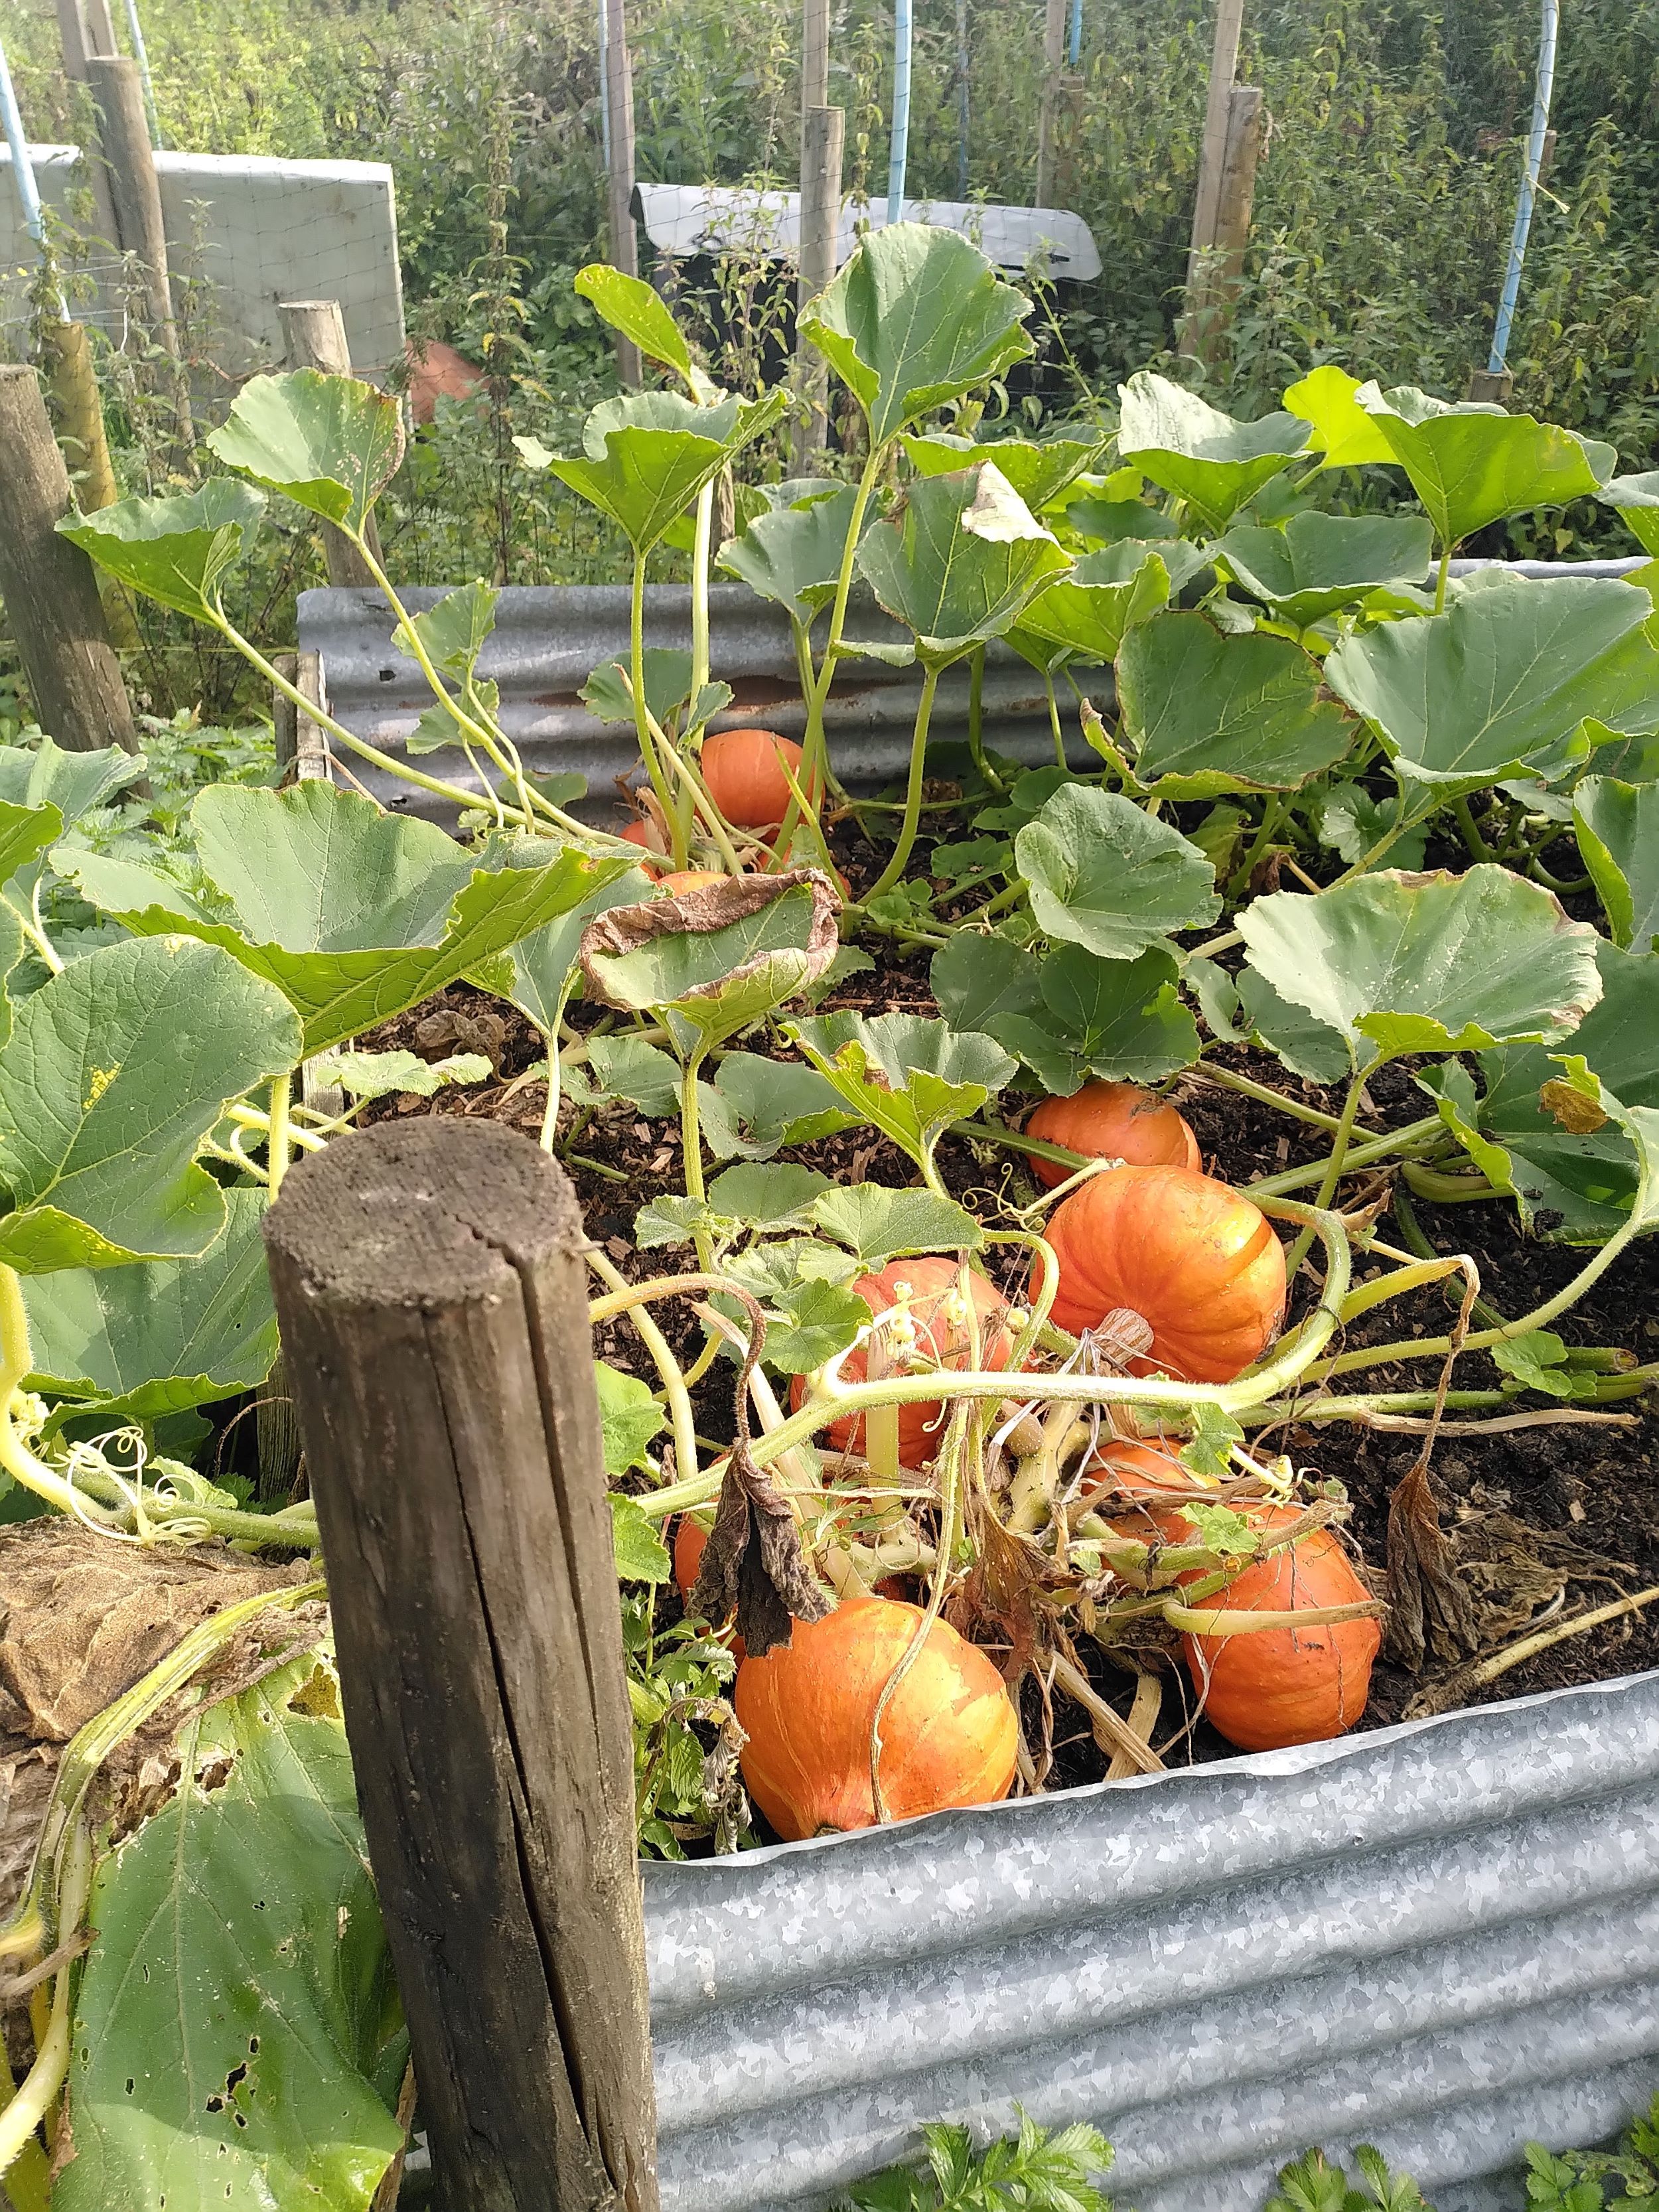 Squashes in the compost heap